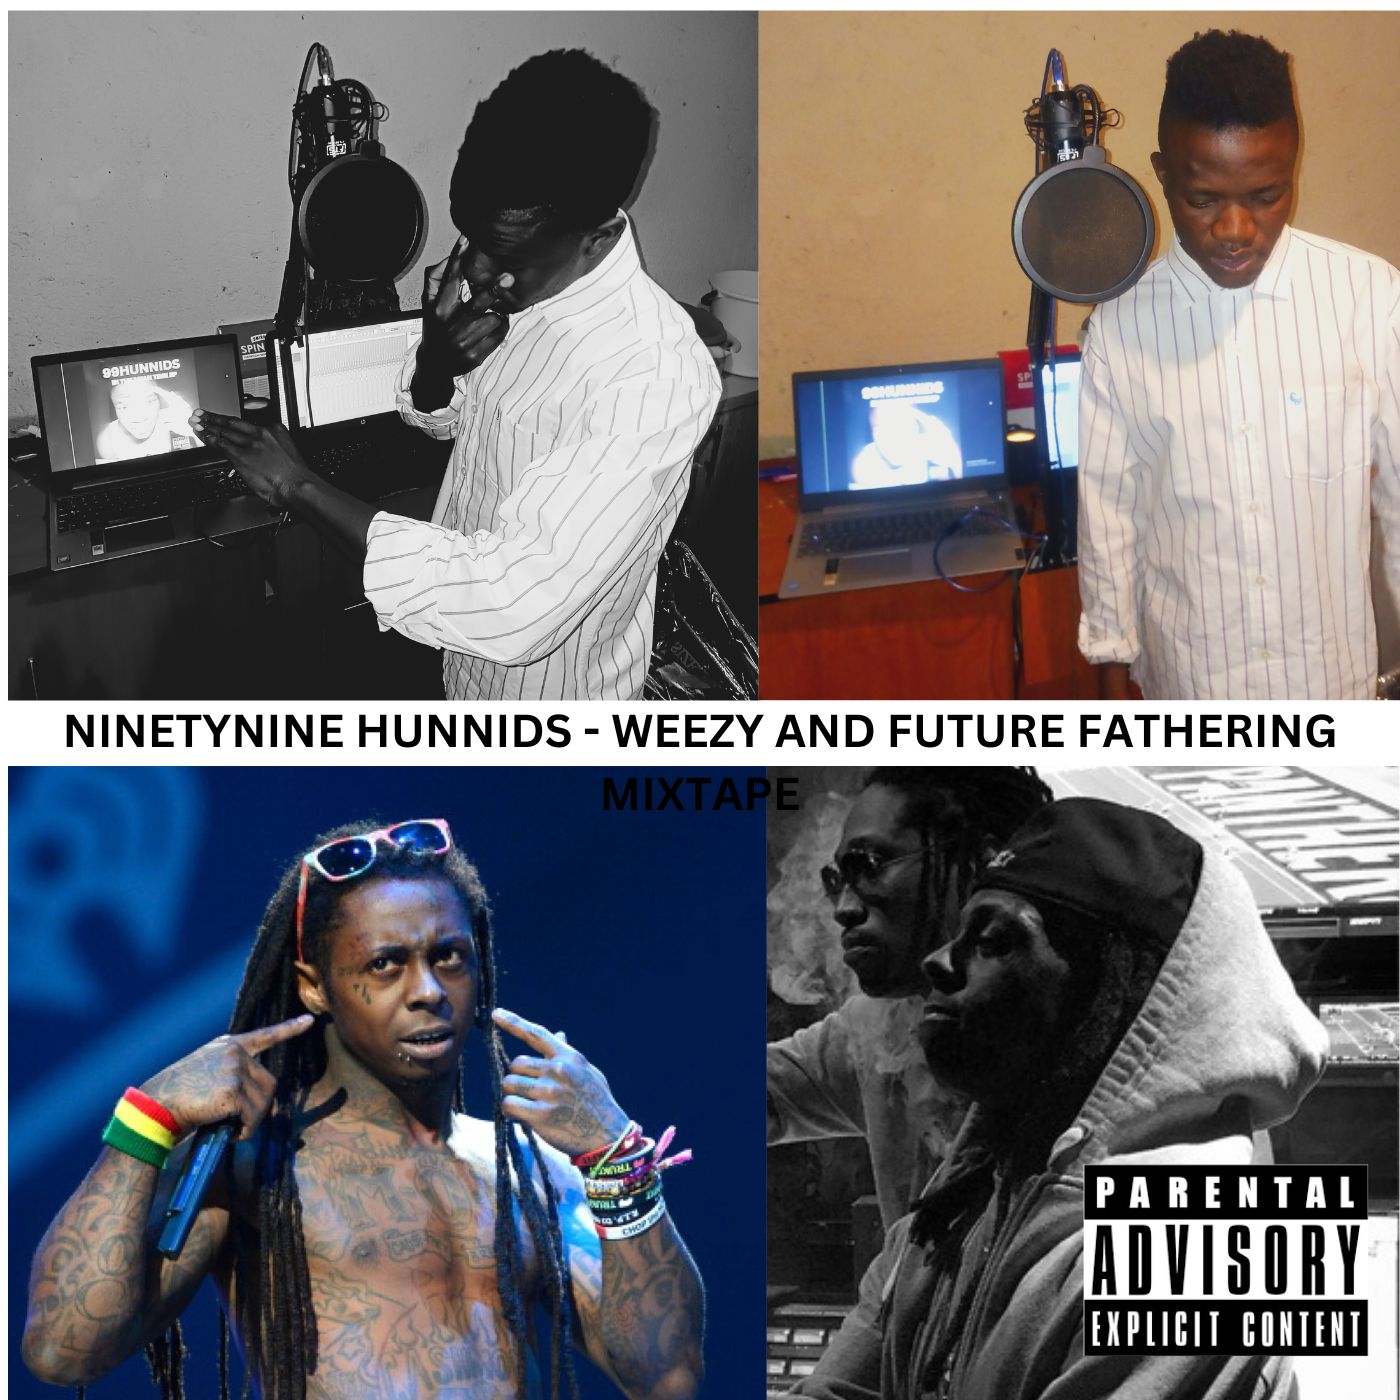 WEEZY AND FUTURE FATHERING - 99Hunnids